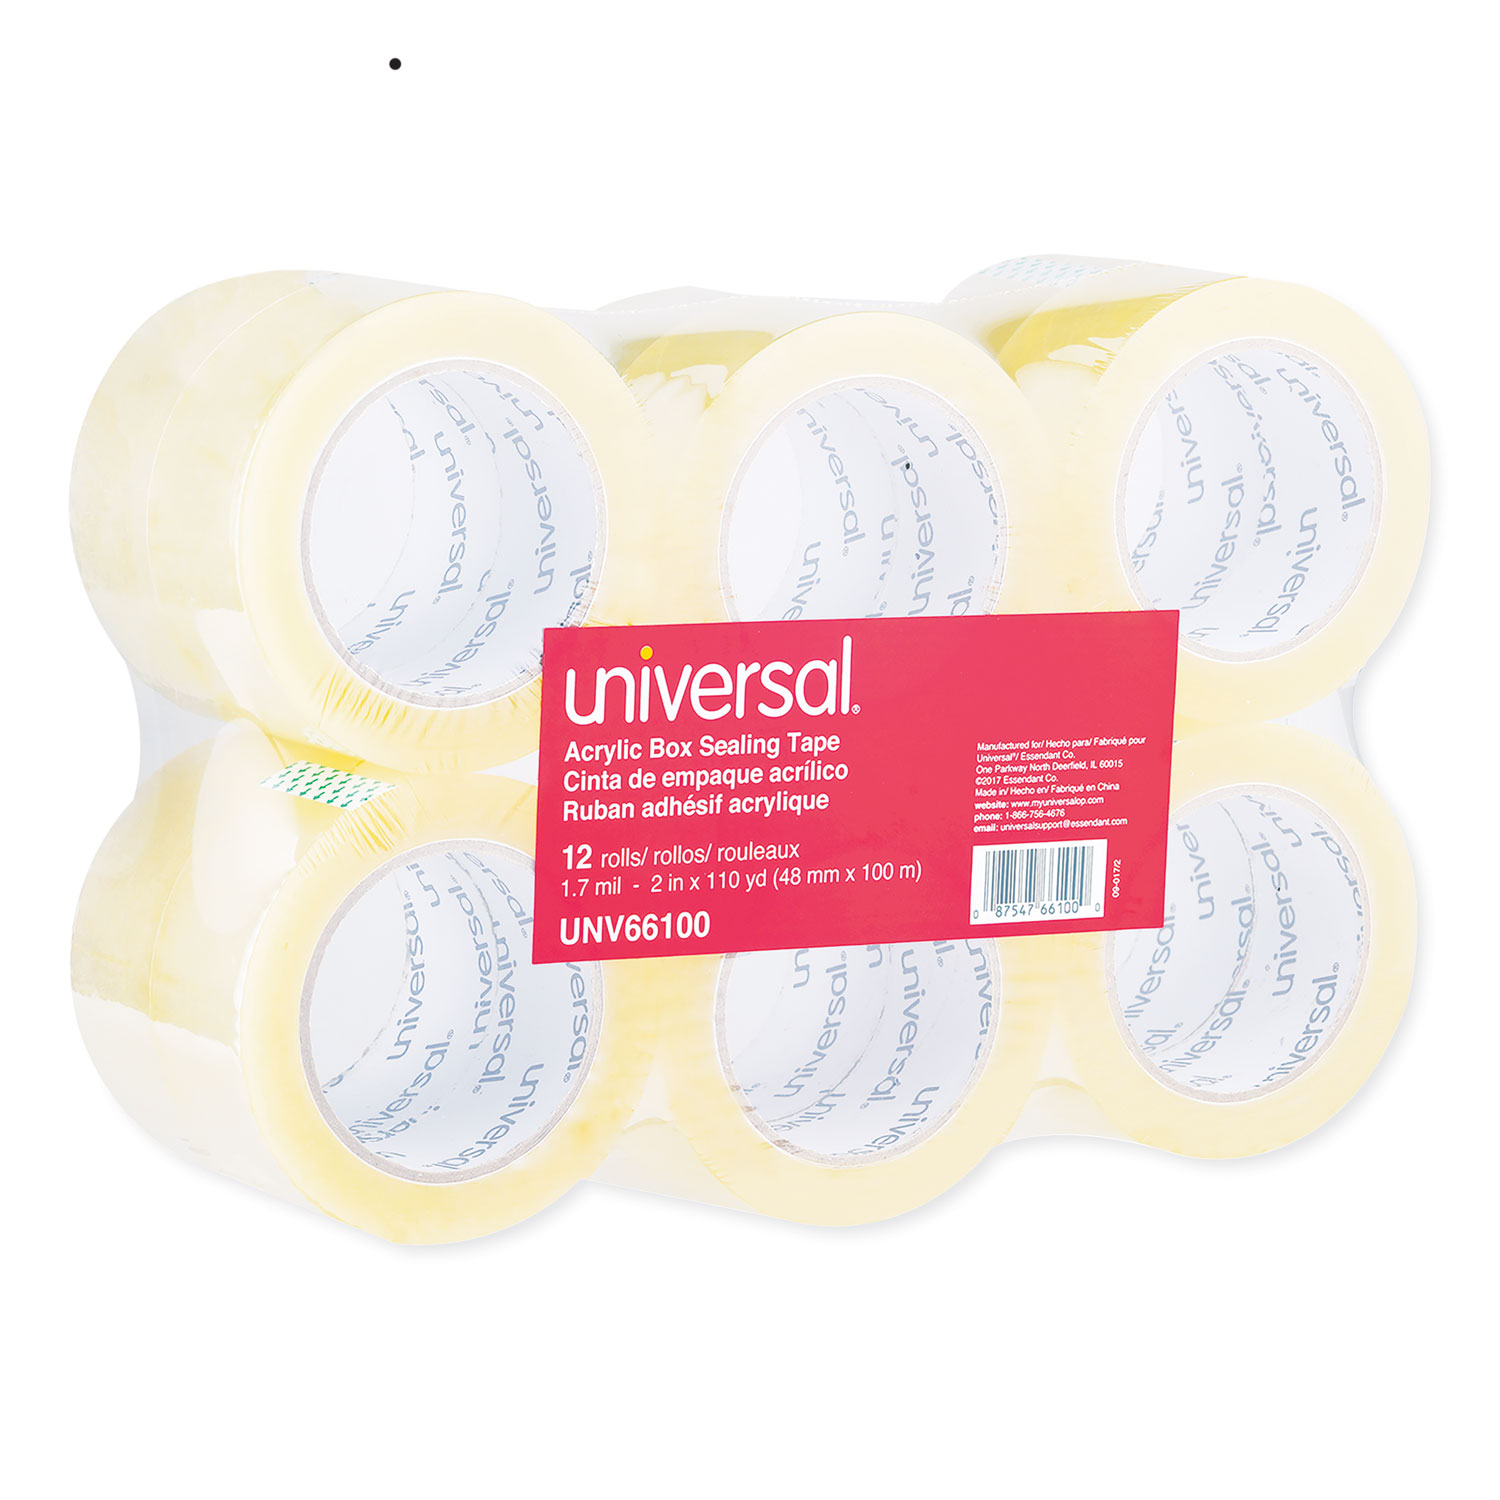  Universal UNV66100 Deluxe General-Purpose Acrylic Box Sealing Tape, 3 Core, 1.88 x 110 yds, Clear, 12/Pack (UNV66100) 